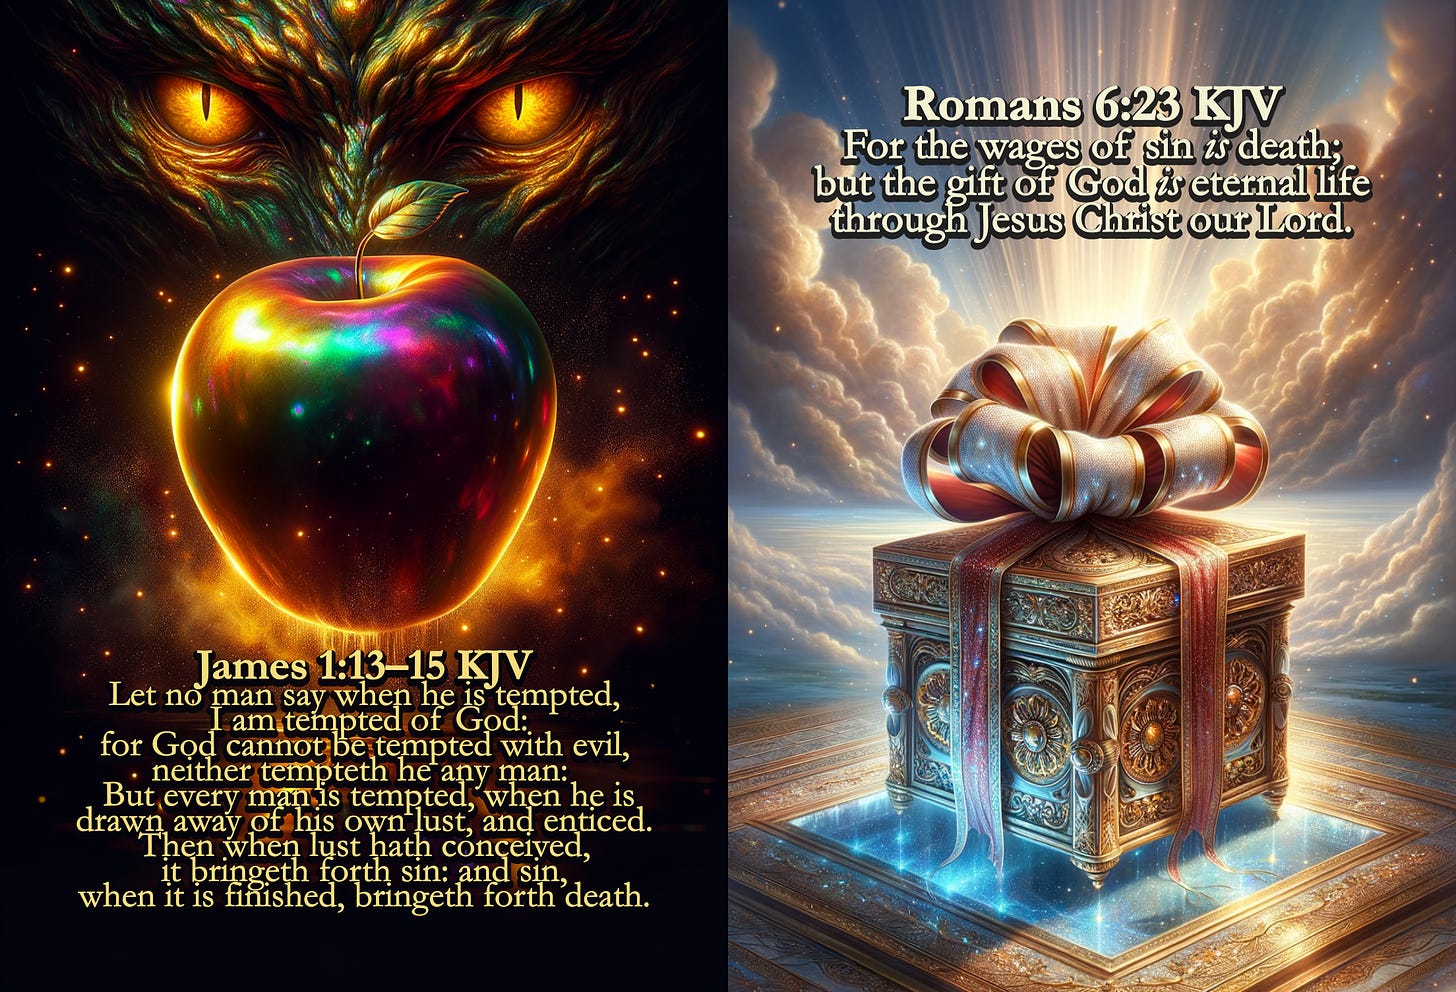 This image is a digital artwork divided into two panels, each featuring a central object and a Bible verse.  On the left panel, there's a vibrant, colorful apple with a spectrum-like sheen, appearing to float in space with stars around it. Above the apple loom the fiery, intense eyes of what might be an owl or some mythical creature, blending into the dark cosmic background. Below the apple, there's a quote from the Book of James (1:13-15 KJV) discussing temptation and sin.  The right panel shows a beautifully ornate gift box with a detailed design and a large, luxurious bow on top. The box is positioned on what seems to be a reflective surface, floating among the clouds with rays of sunlight breaking through. Above the box, there's a quote from the Book of Romans (6:23 KJV) that contrasts the wages of sin with the gift of eternal life through Jesus Christ.